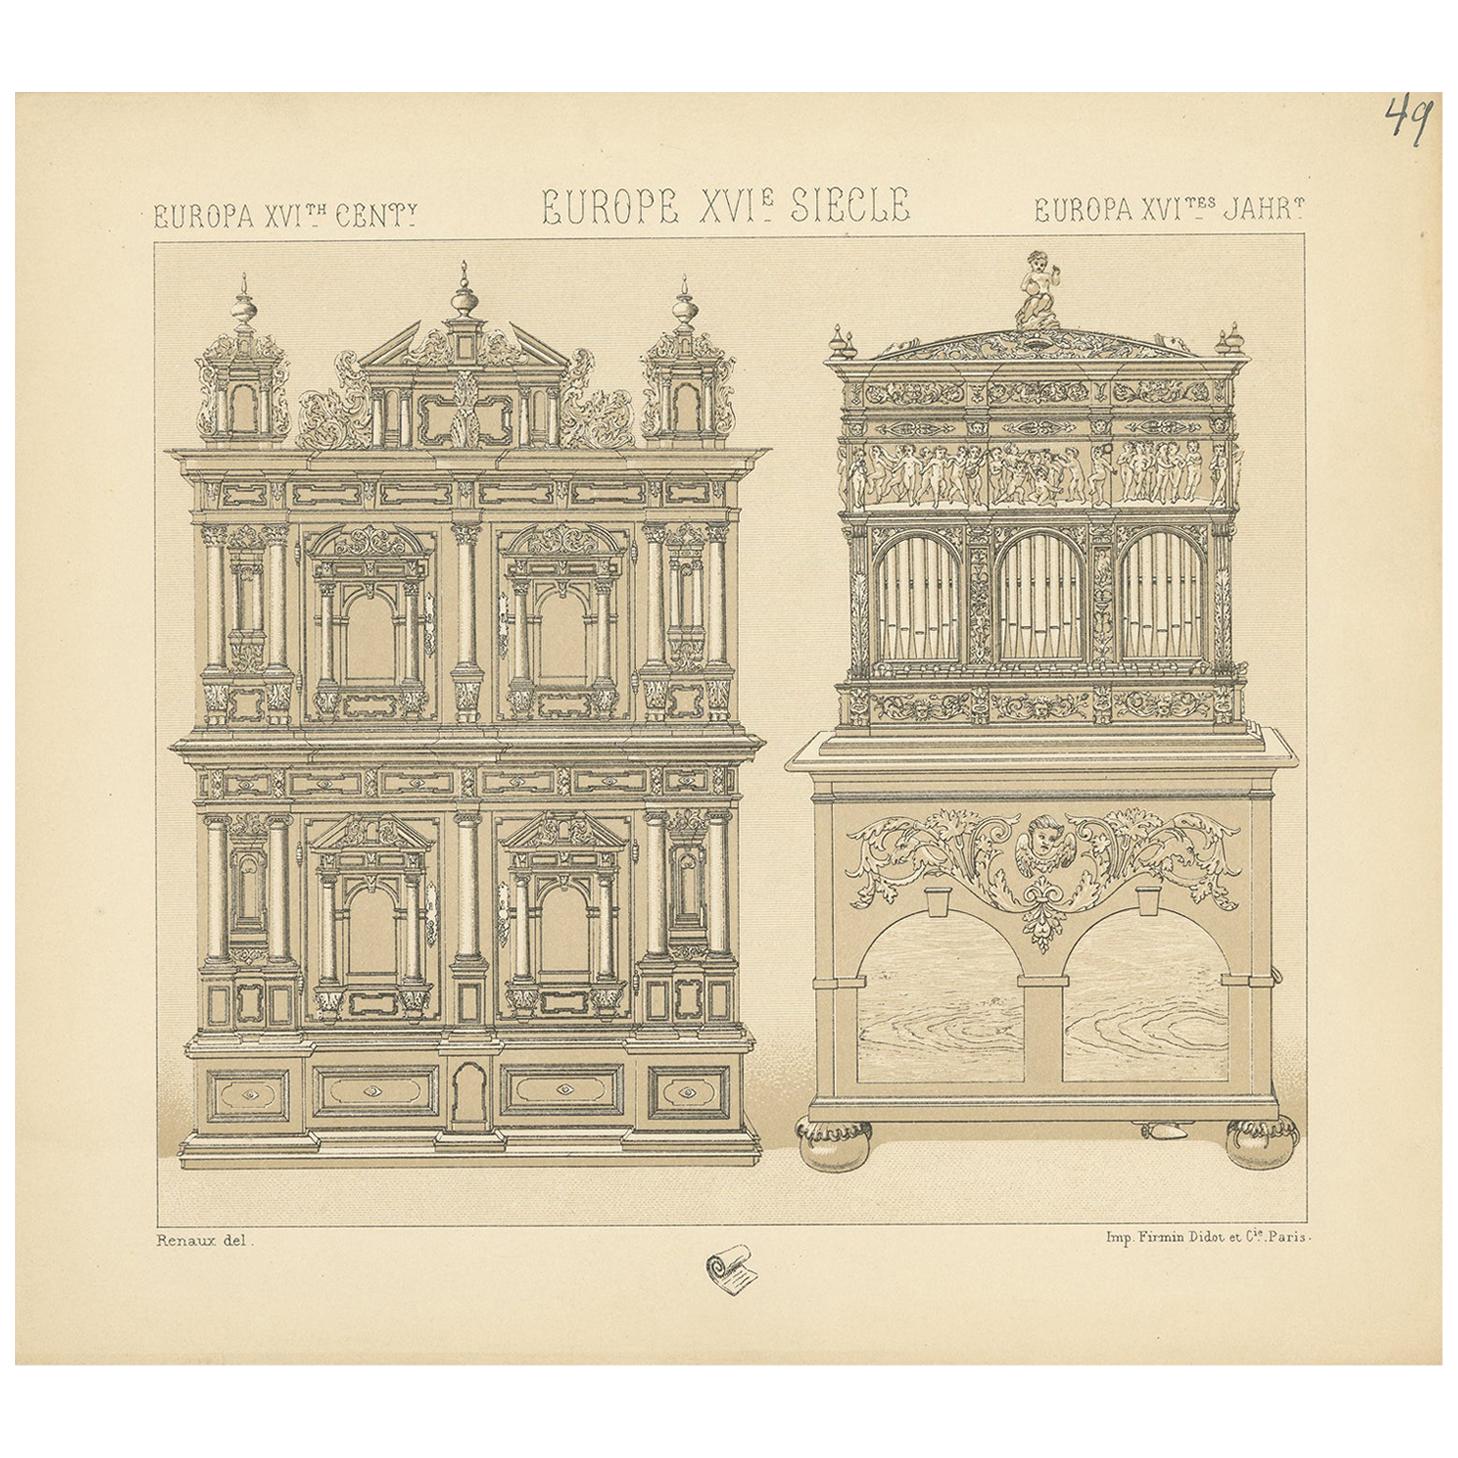 Pl. 49 Antique Print of European XVIth Century Furniture by Racinet, circa 1880 For Sale